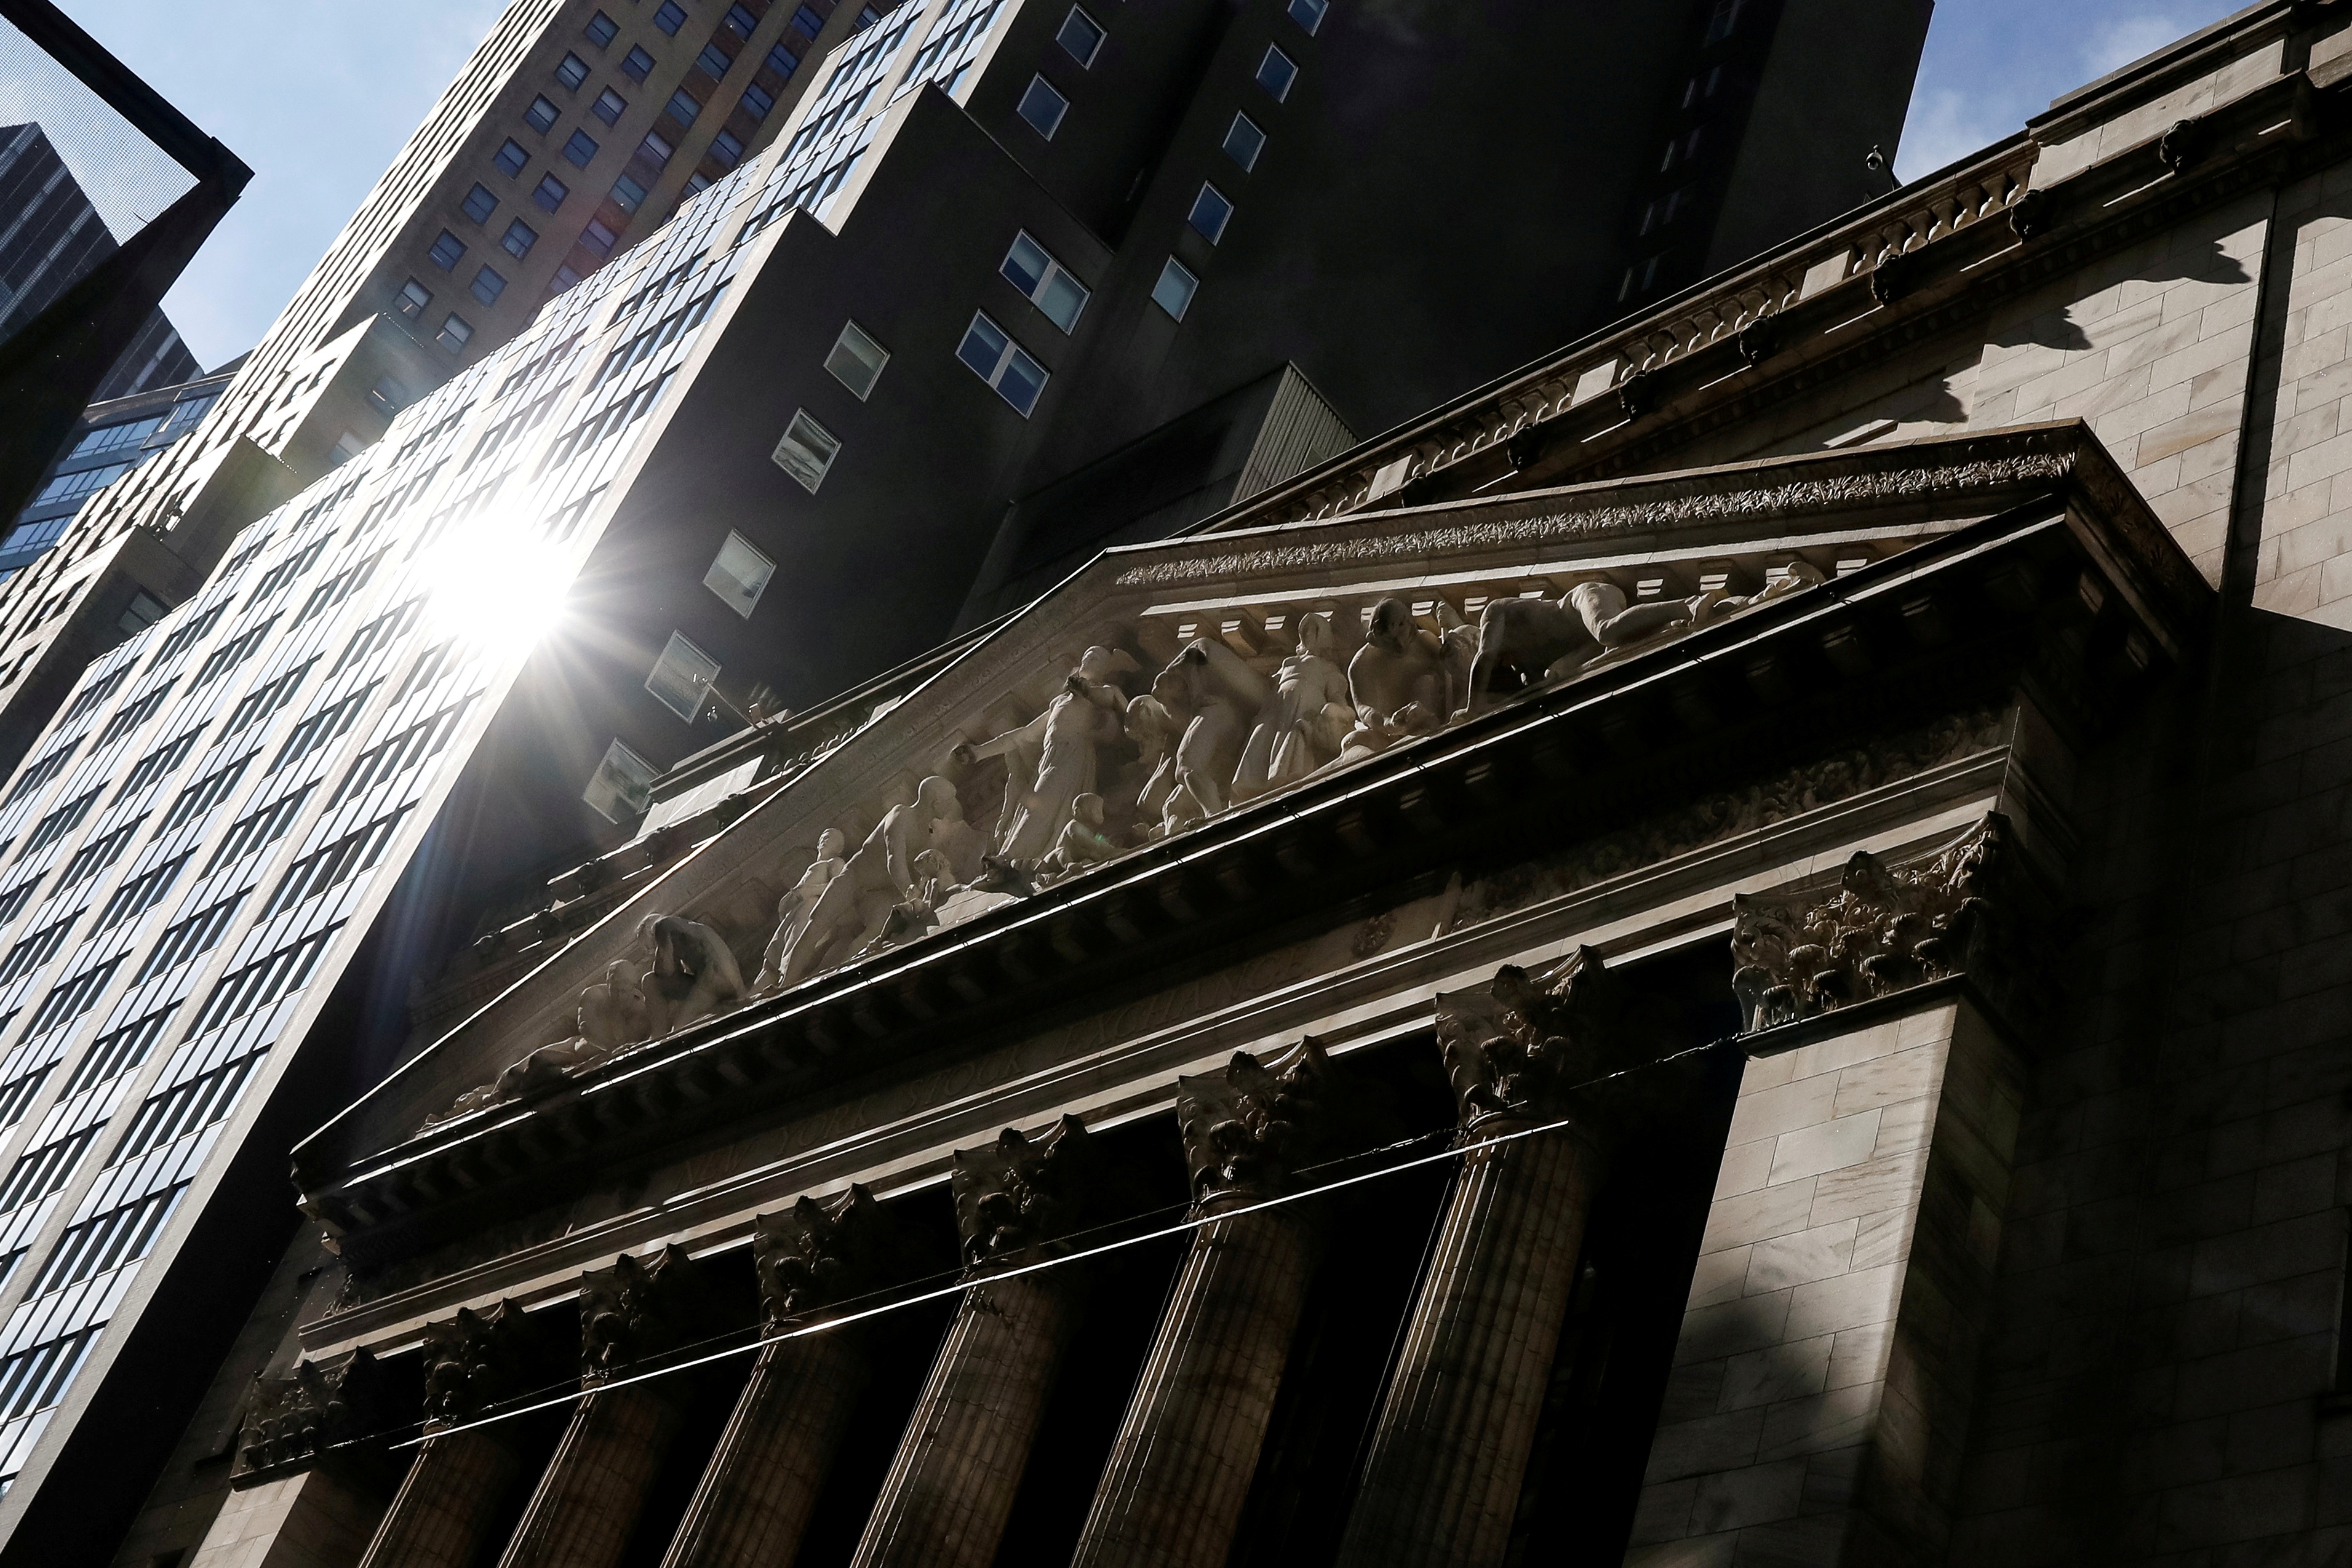 The front facade of the New York Stock Exchange (NYSE) is seen in New York, U.S., February 16, 2021. REUTERS/Brendan McDermid 